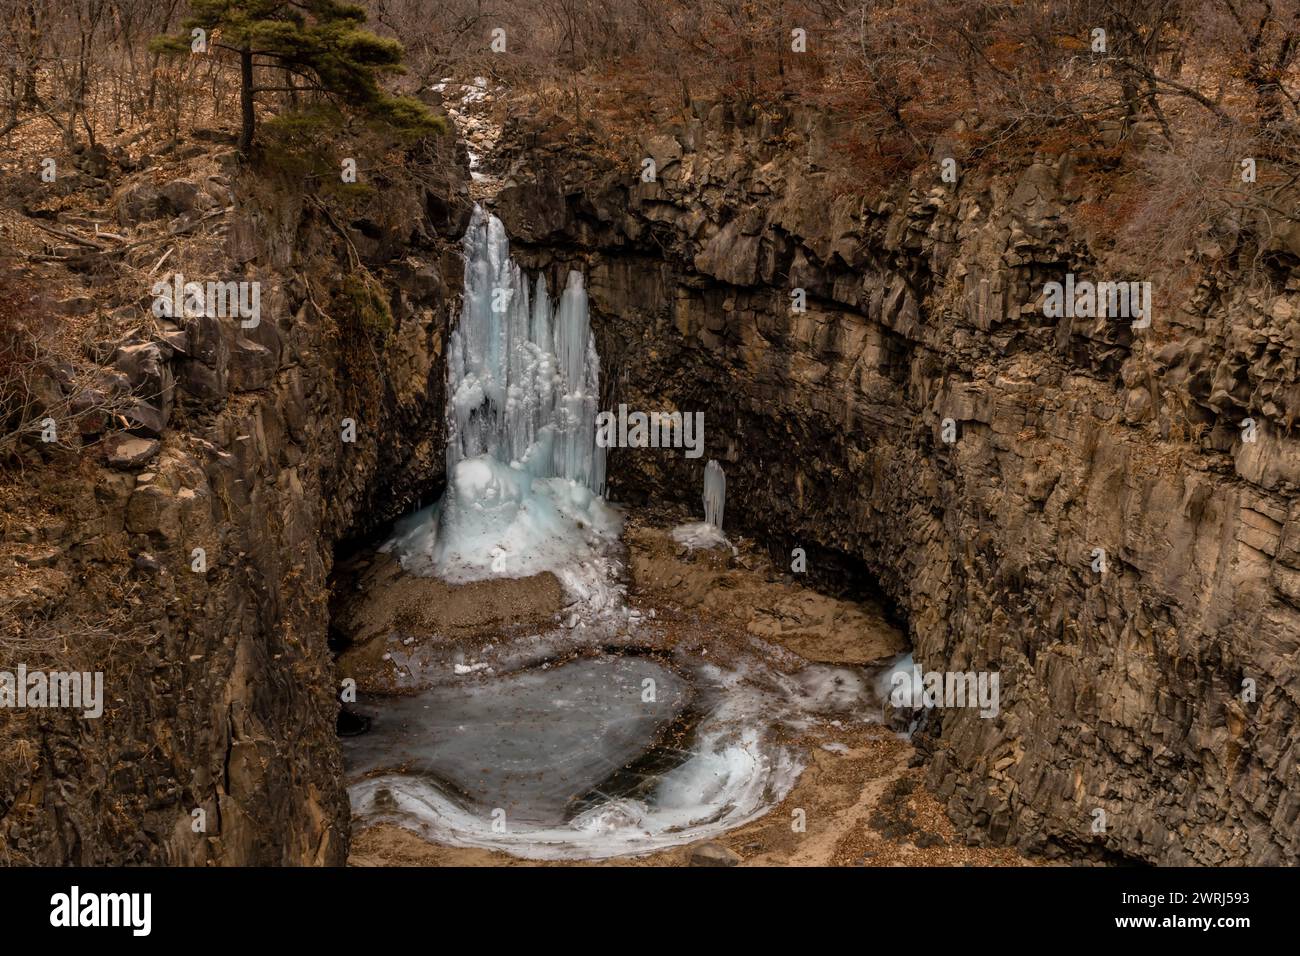 Looking down on frozen waterfall in deep crater located in Gyeonggi province of South Korea Stock Photo